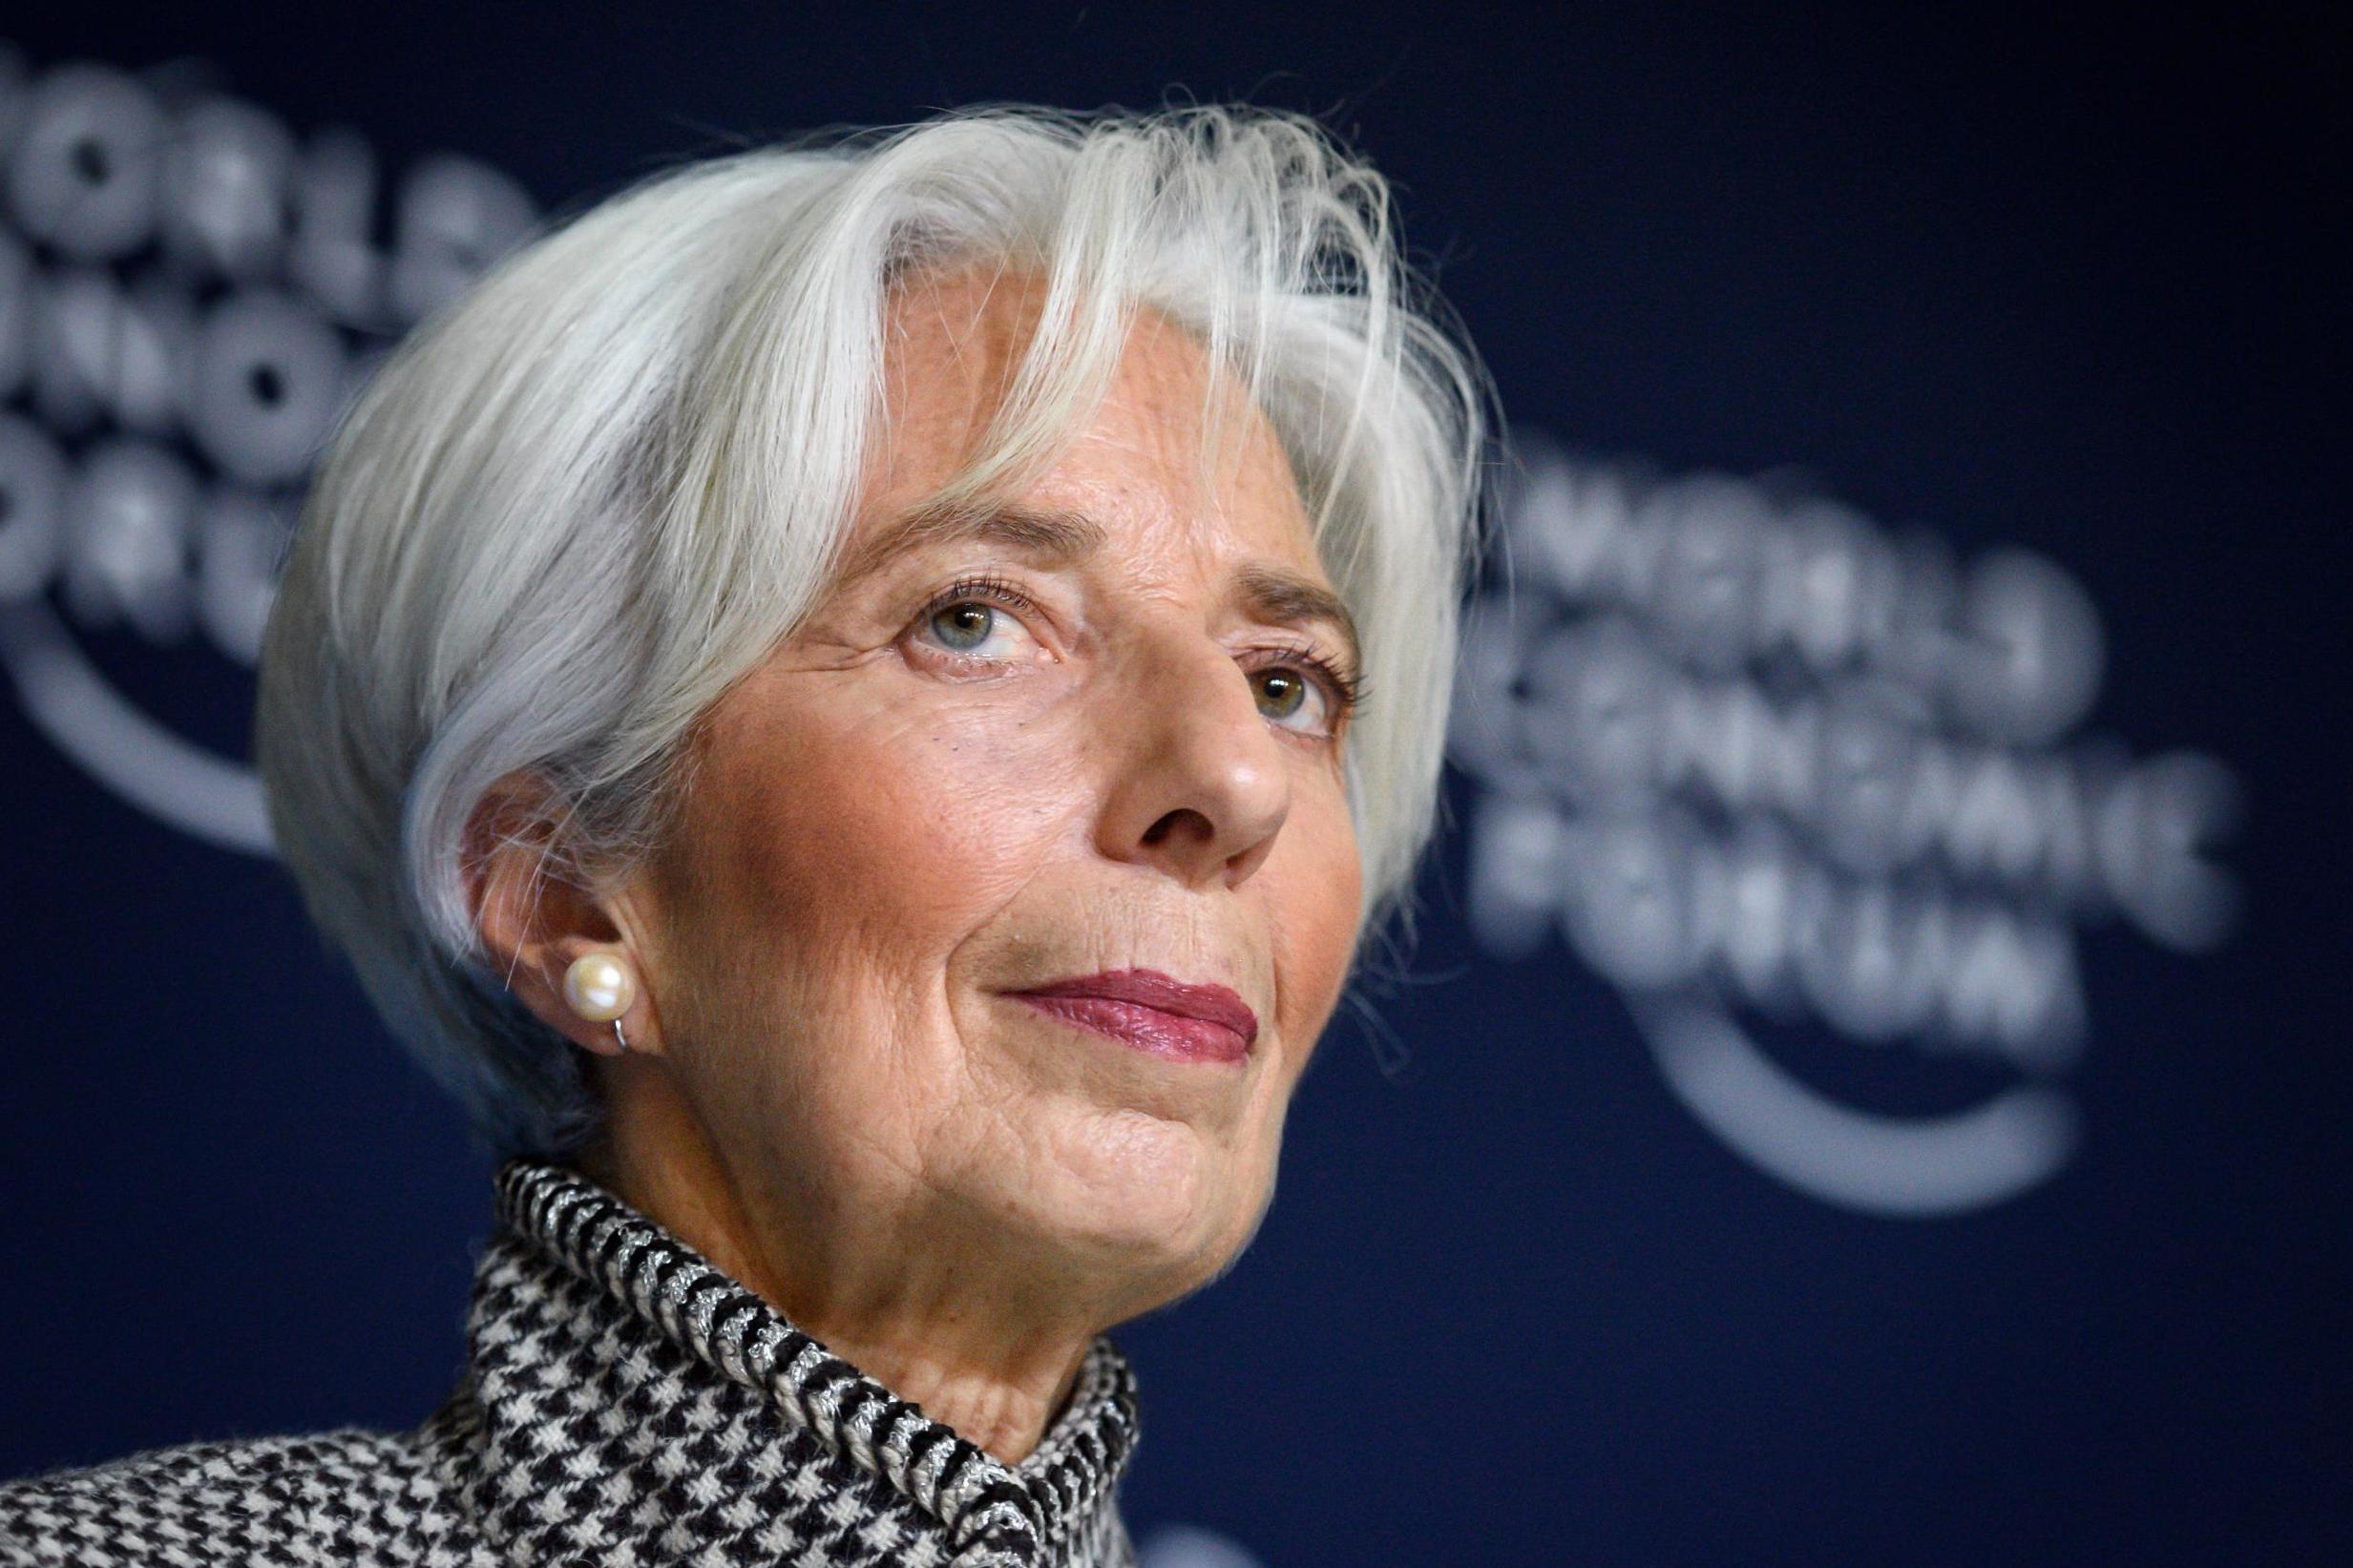 Ms Lagarde has spoken about gender equality between staff